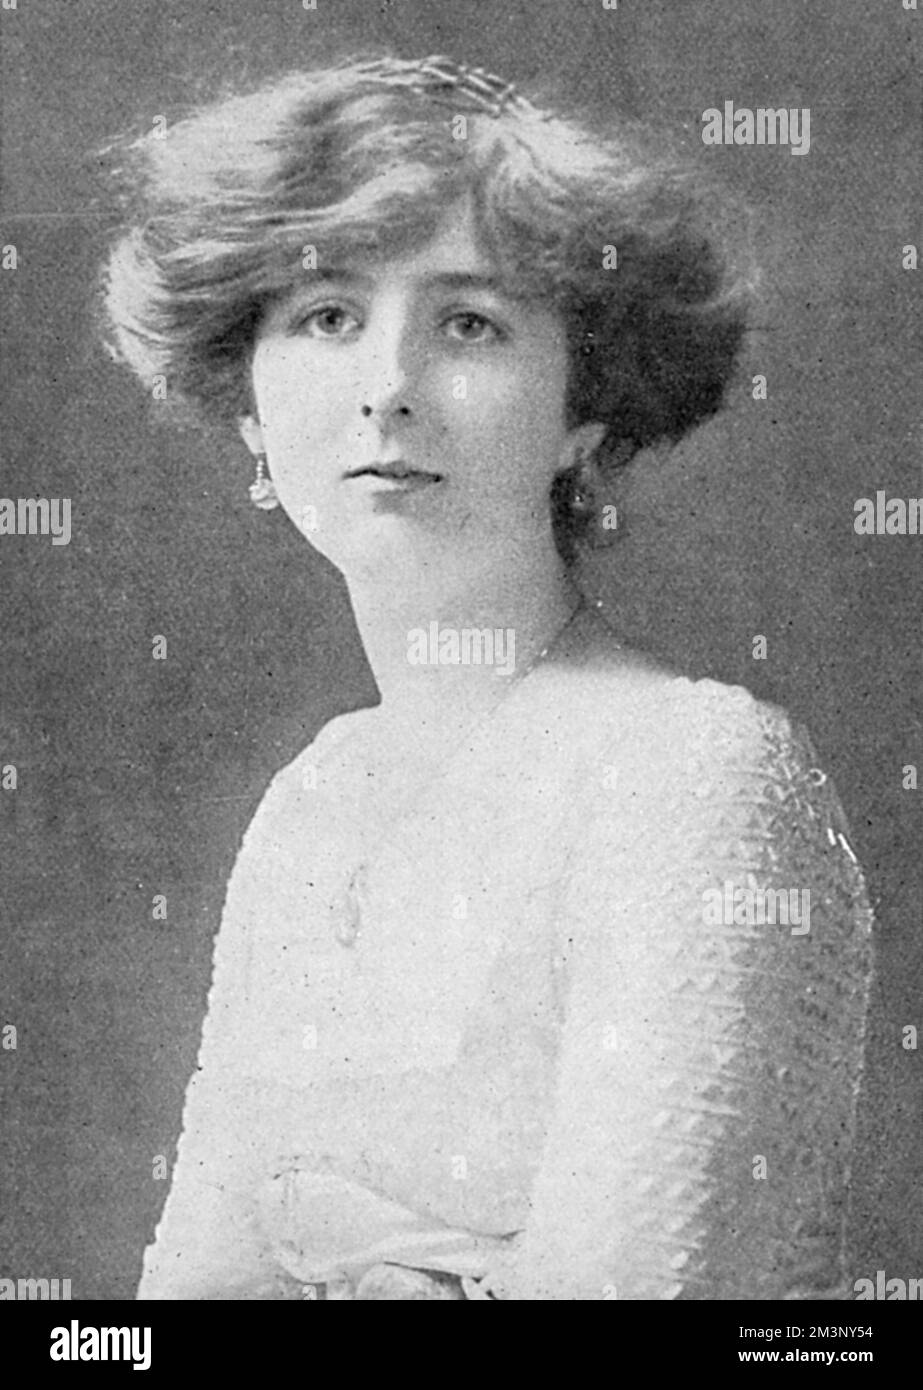 Lady Idina Sackville, at the time of her engagement to Mr David Euan  Wallace, her first husband, whom she divorced in 1919.  Five-times married Idina would gain notoriety as part of the Happy Valley Set when she moved to Kenya in 1924 with her third husband, Josslyn Hay, Earl of Errol.  With her serial marriages and reputation for debauched decadence, she inspired the character of 'The Bolter' in Nancy Mitford's novels, The Pursuit of Love and Love in a Cold Climate, Evelyn Waugh's Vile Bodies and the character Iris Storm in The Green Hat by Michael Arlen.       Date: 1913 Stock Photo